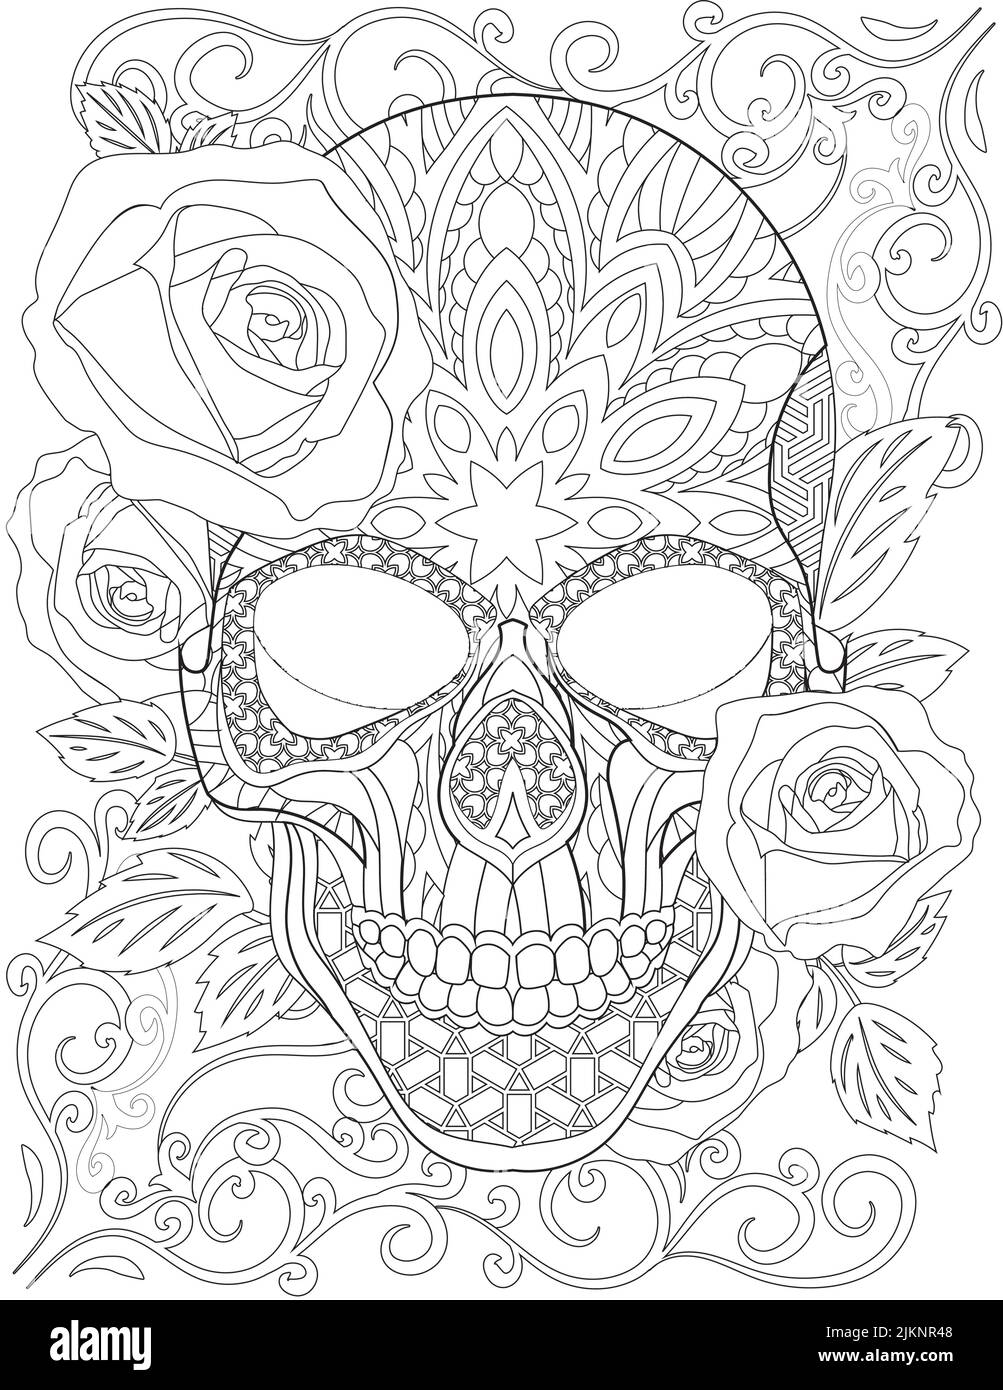 A skull Tattoo Drawing Surrounded By Roses And Eaves With His Mouth Closed Stock Vector